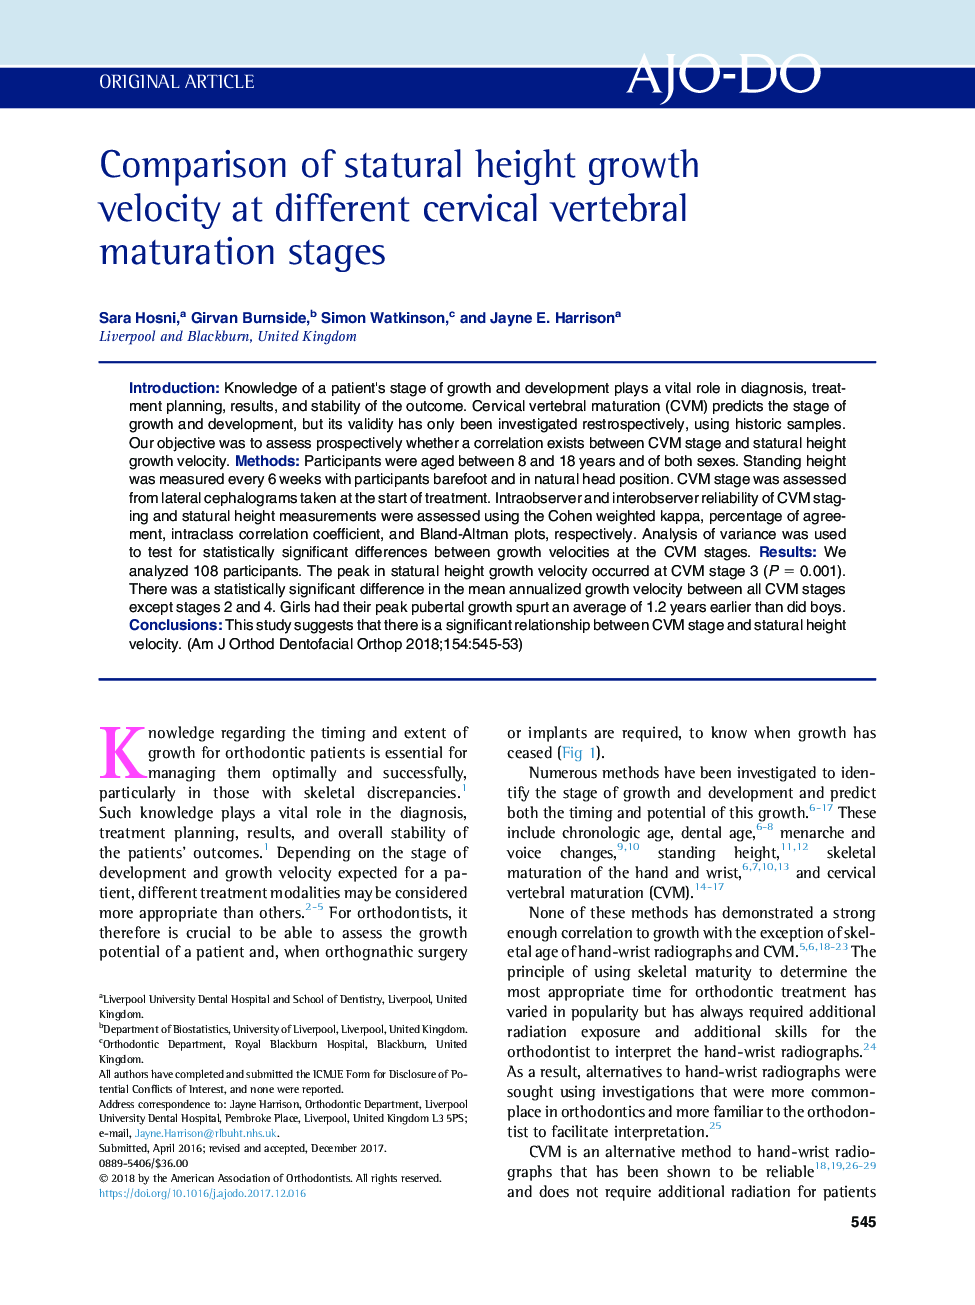 Comparison of statural height growth velocity at different cervical vertebral maturation stages